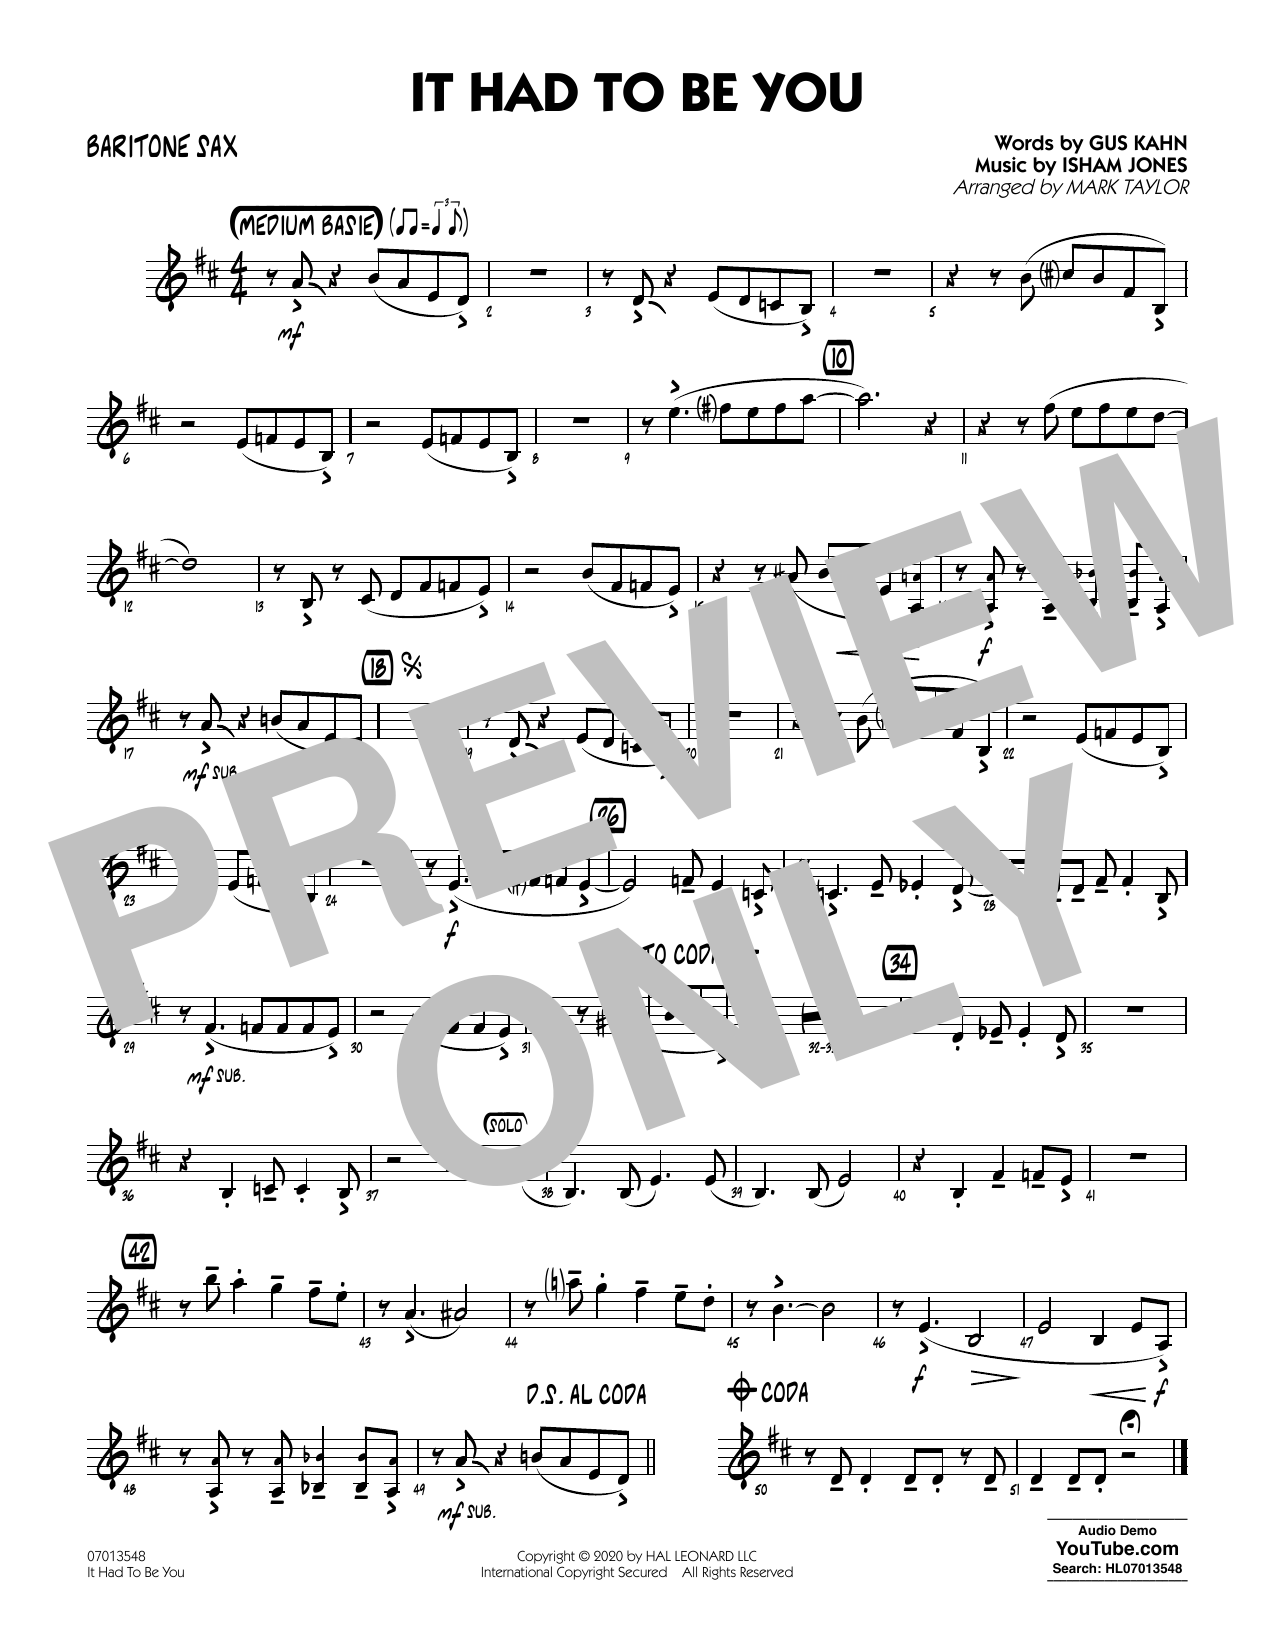 Download Isham Jones and Gus Kahn It Had to Be You (arr. Mark Taylor) - B Sheet Music